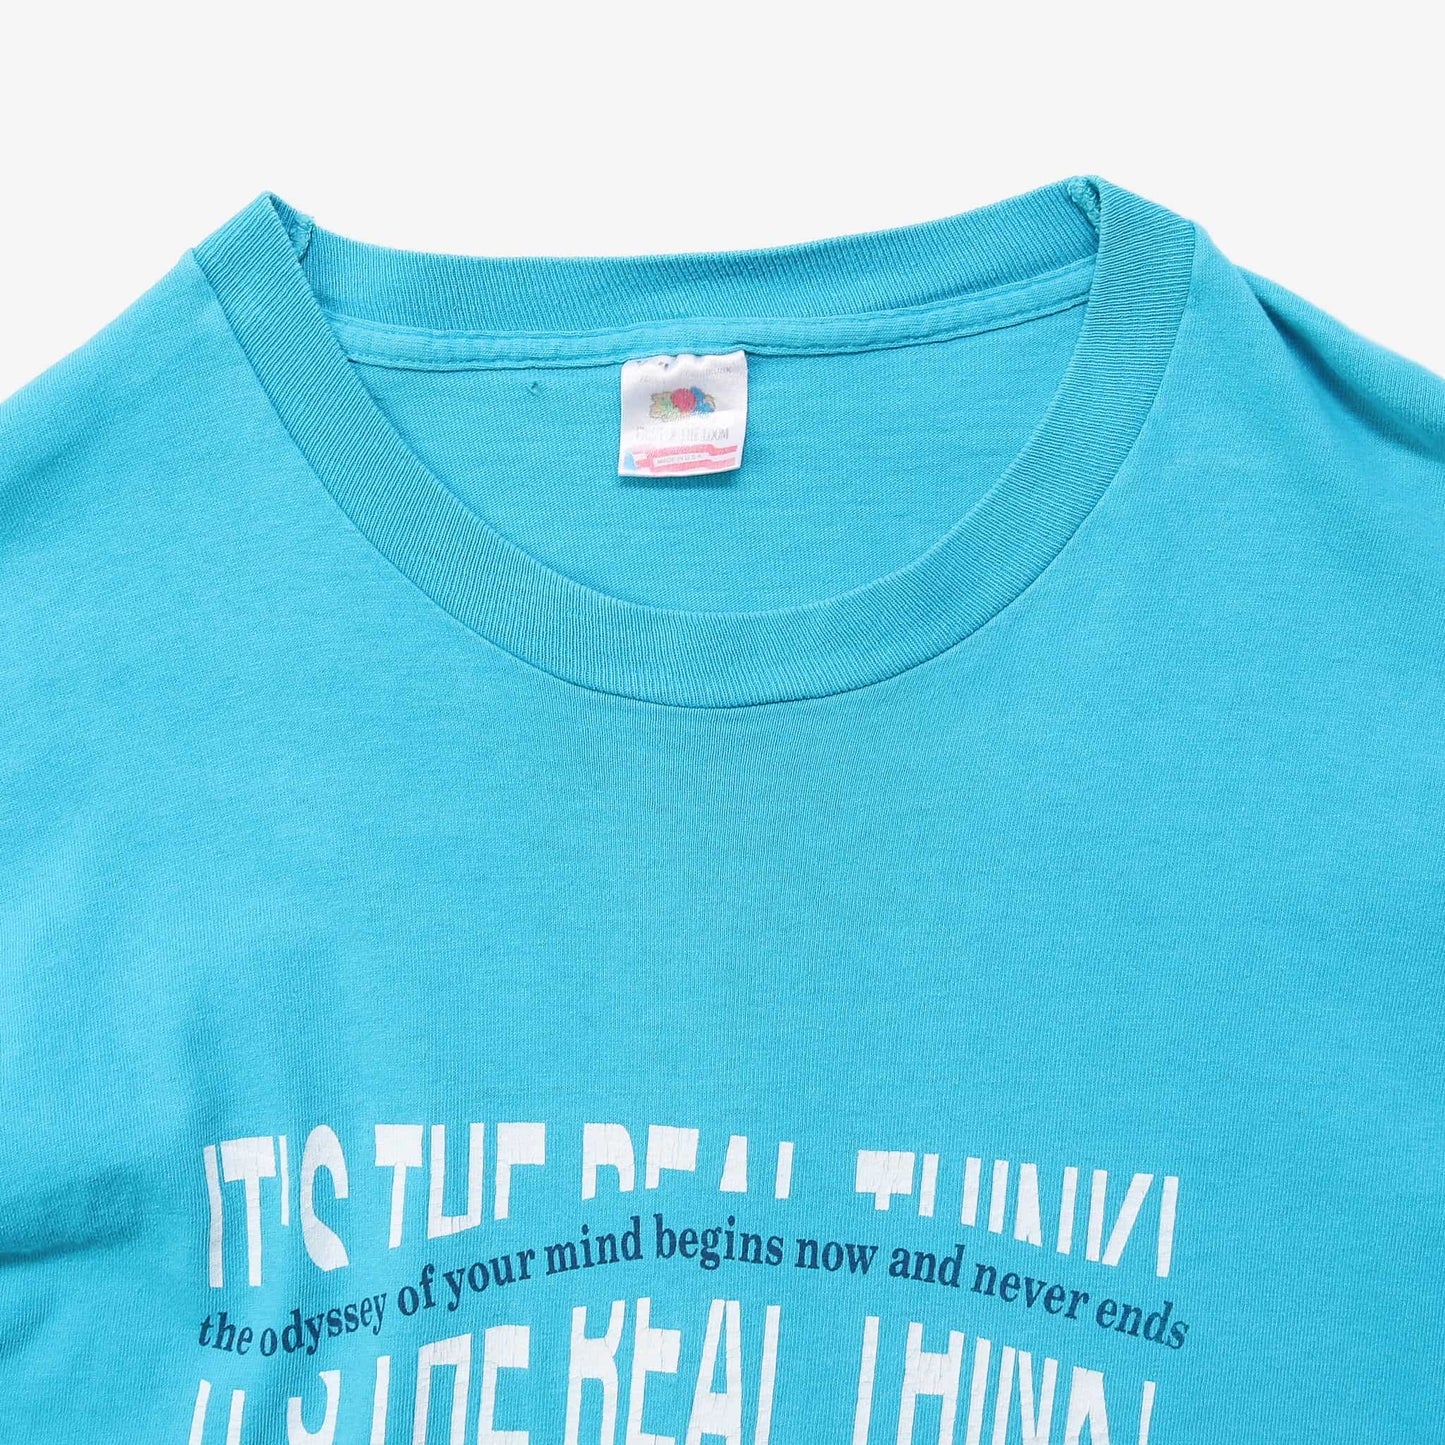 Vintage 'Its The Real Think!' T-Shirt - American Madness